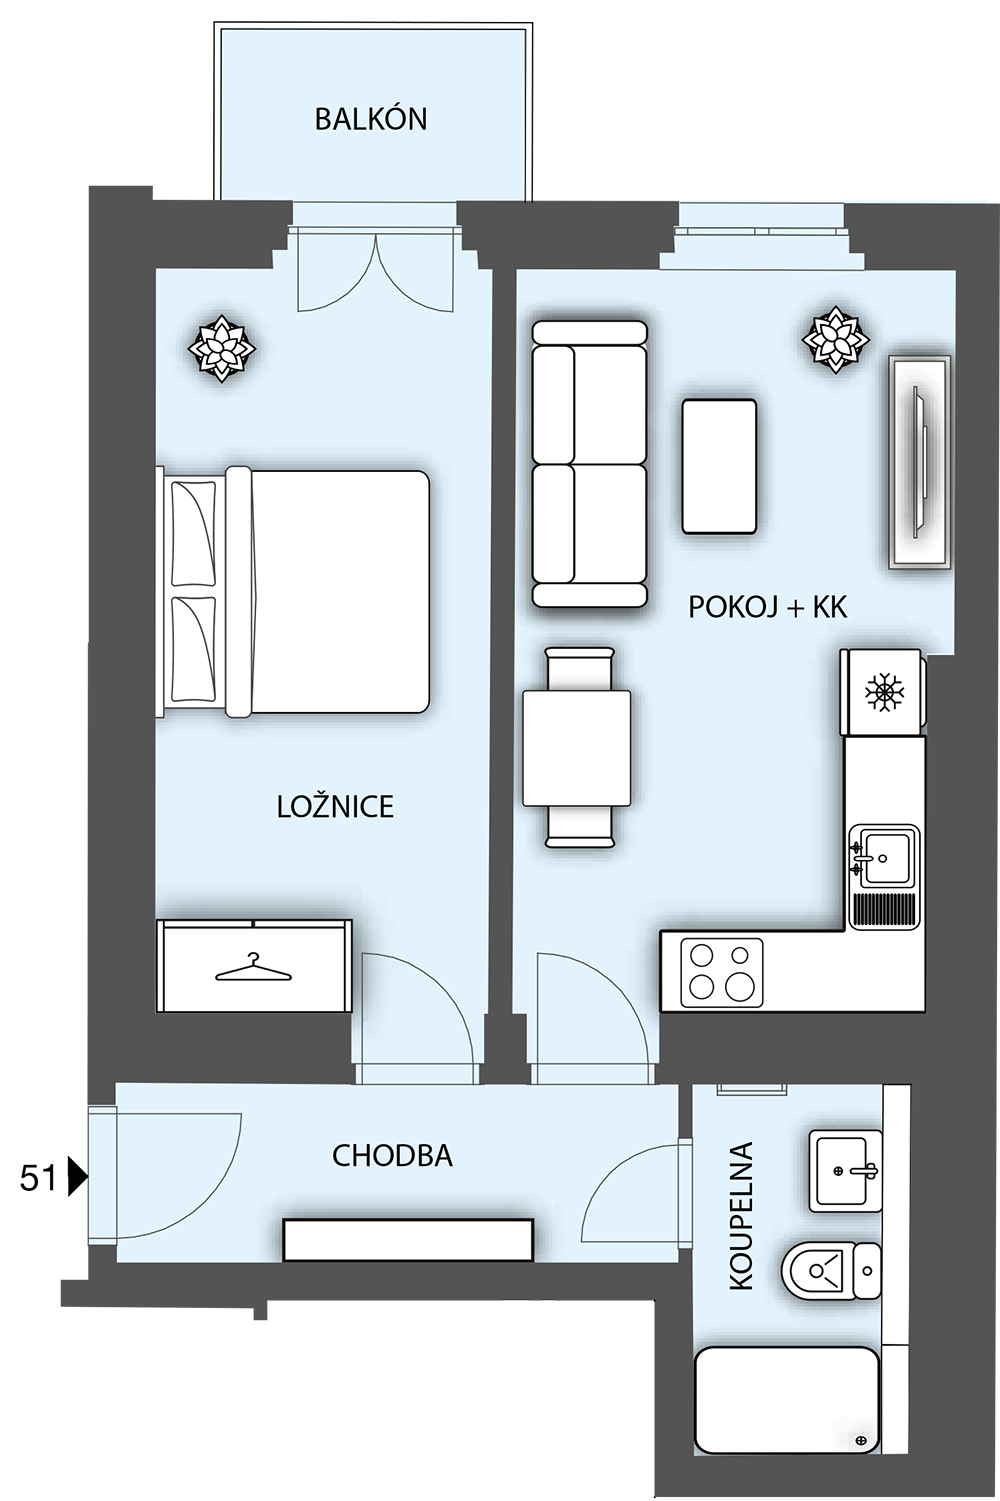 Residential unit two rooms + kitchenette